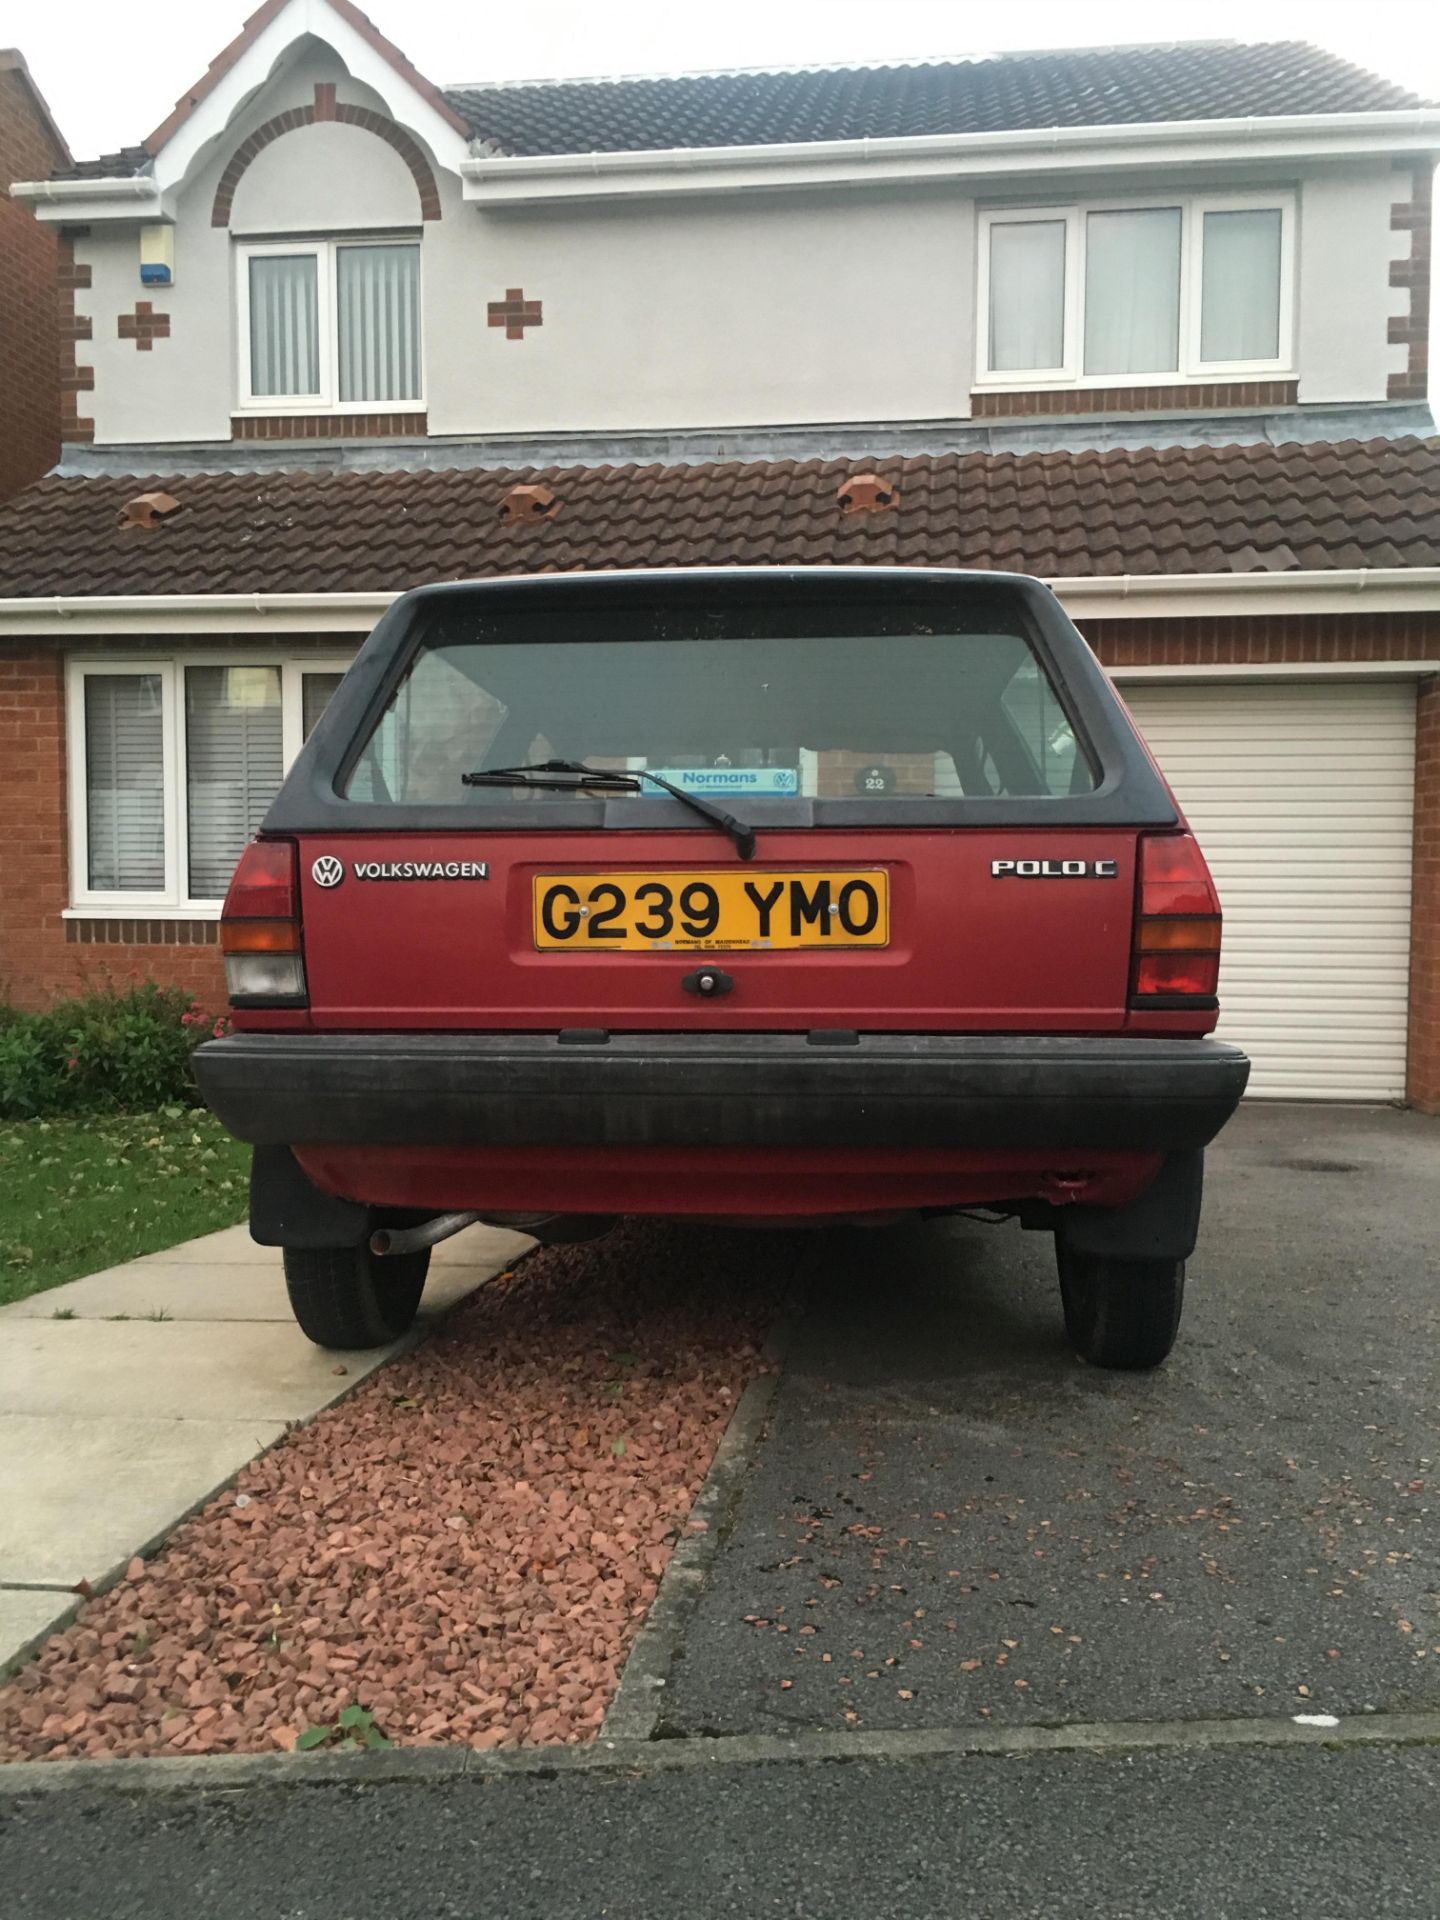 1989 1.0 VW Polo Mk2 Breadvan 81K Miles No Mot  Completely Original From Factory - Image 4 of 15